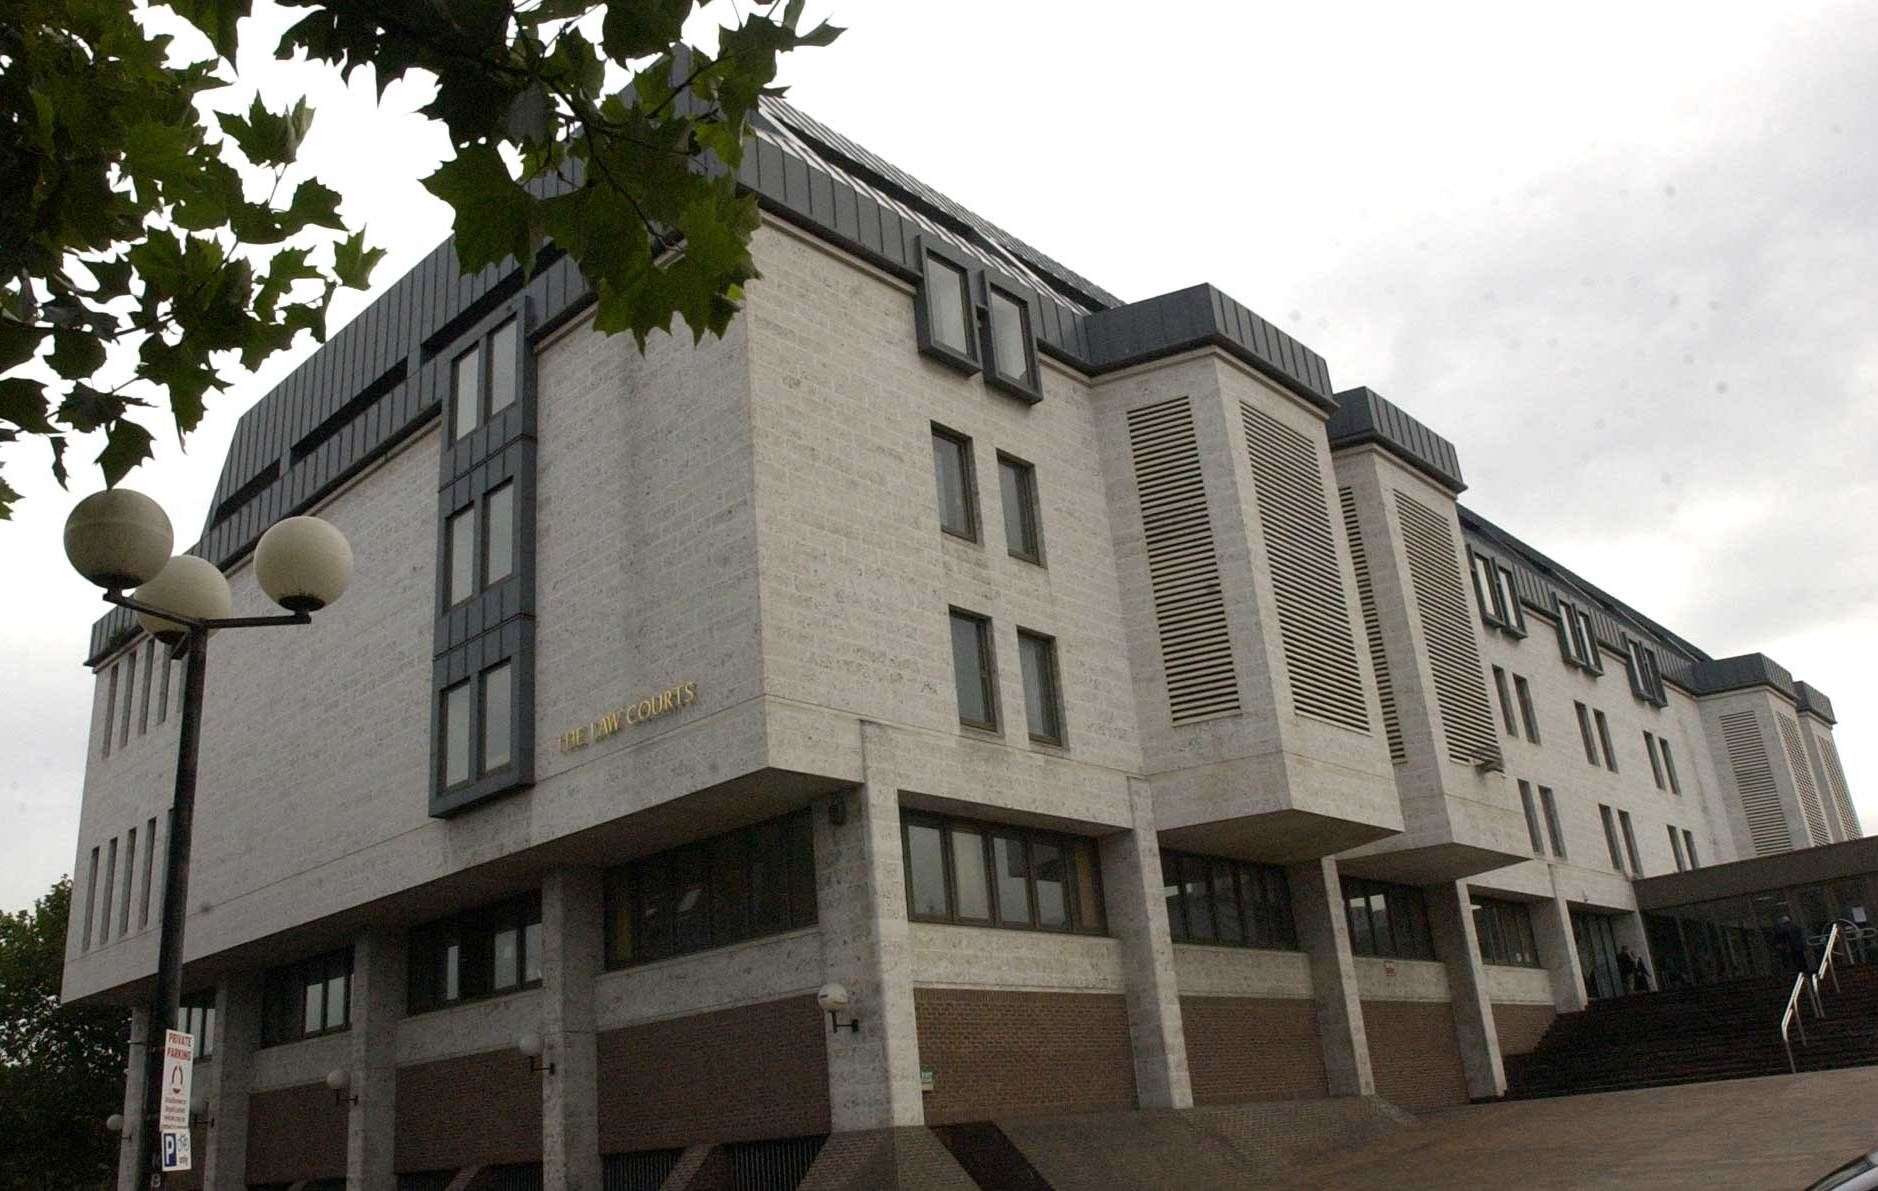 The brave victim saw her ex-partner jailed after the case was heard at Maidstone Crown Court